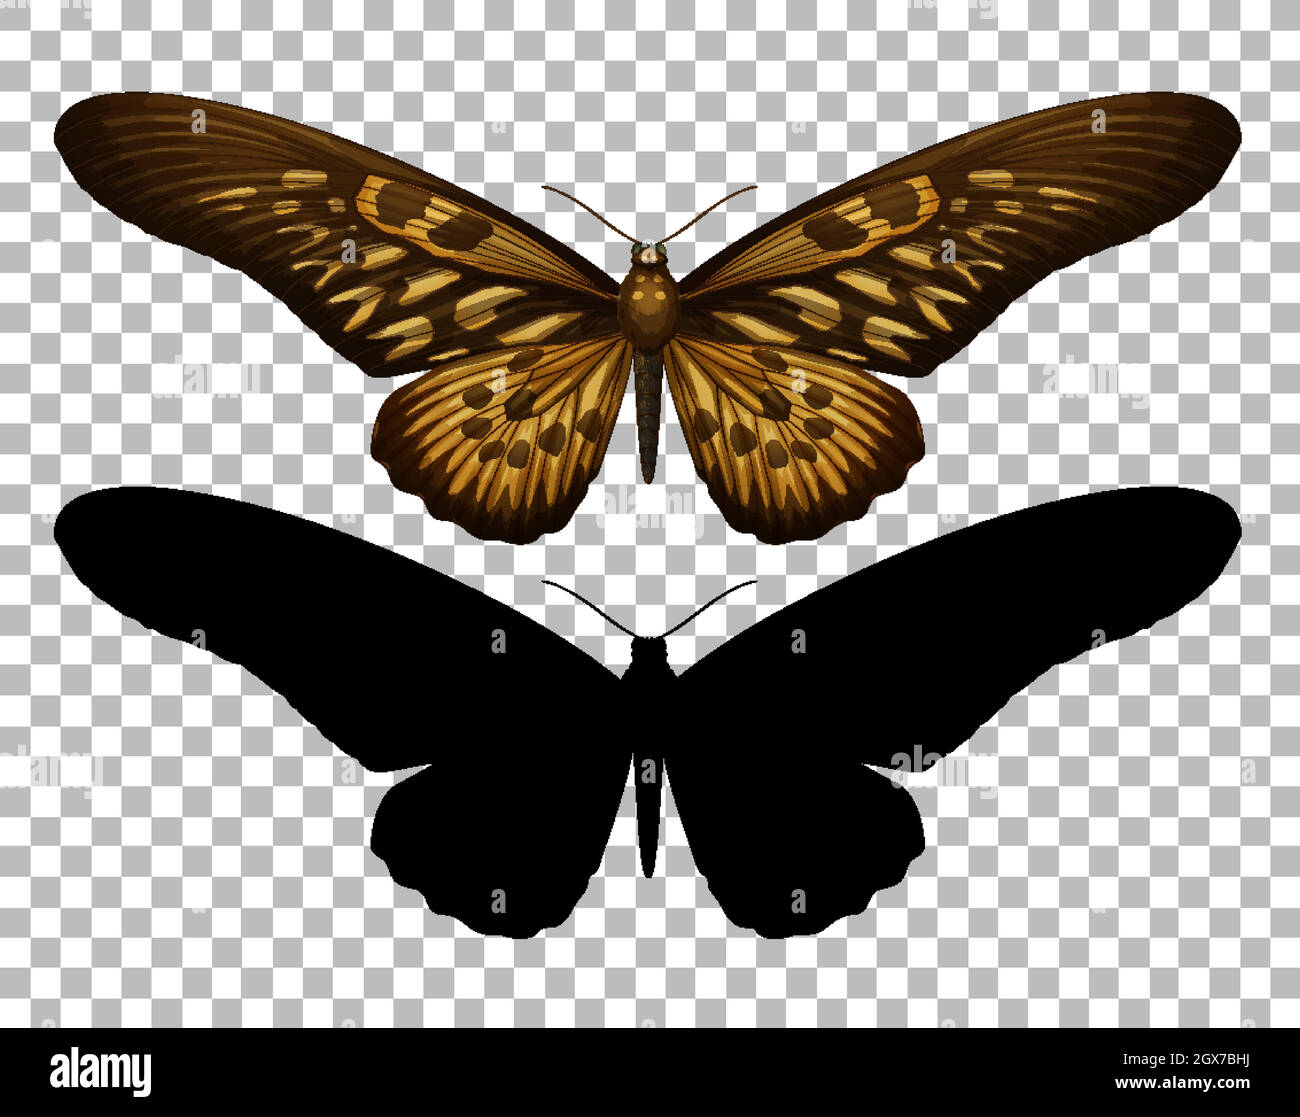 Transparent background butterfly clipart Stock Vector Images - Alamy